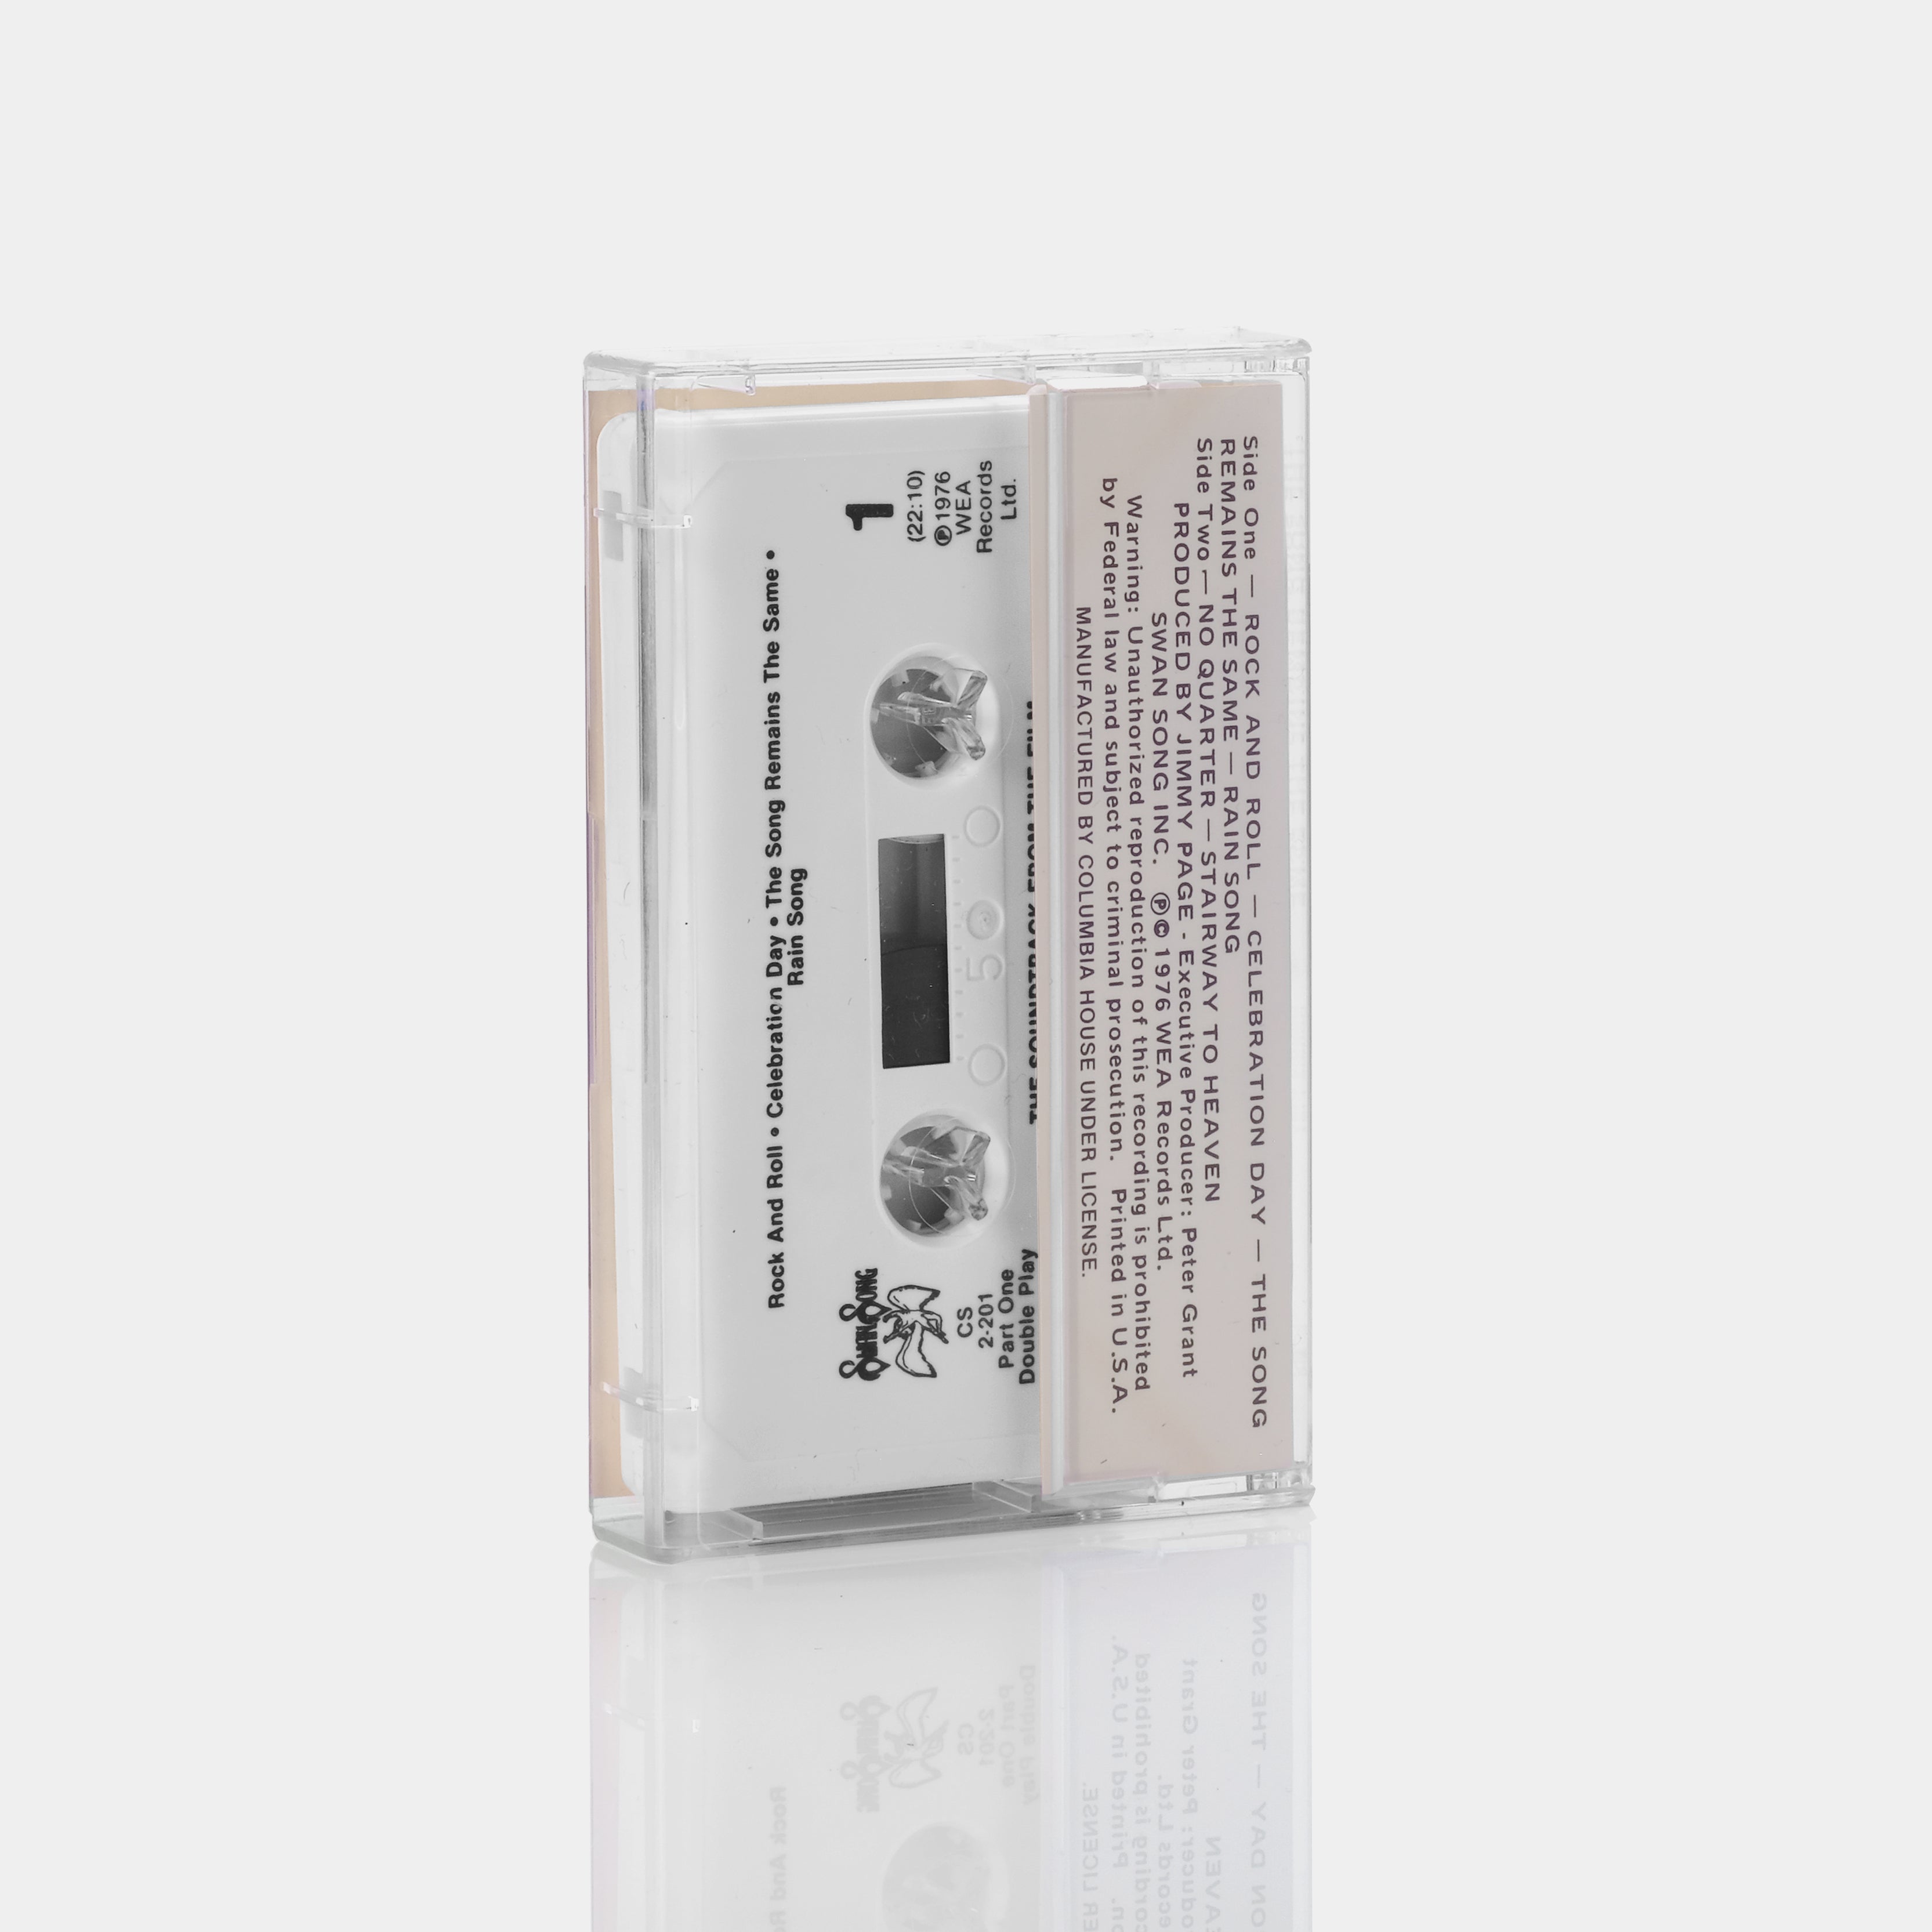 Led Zeppelin - The Soundtrack From The Film Led Zeppelin The Song Remains The Same (Part 1) Cassette Tape